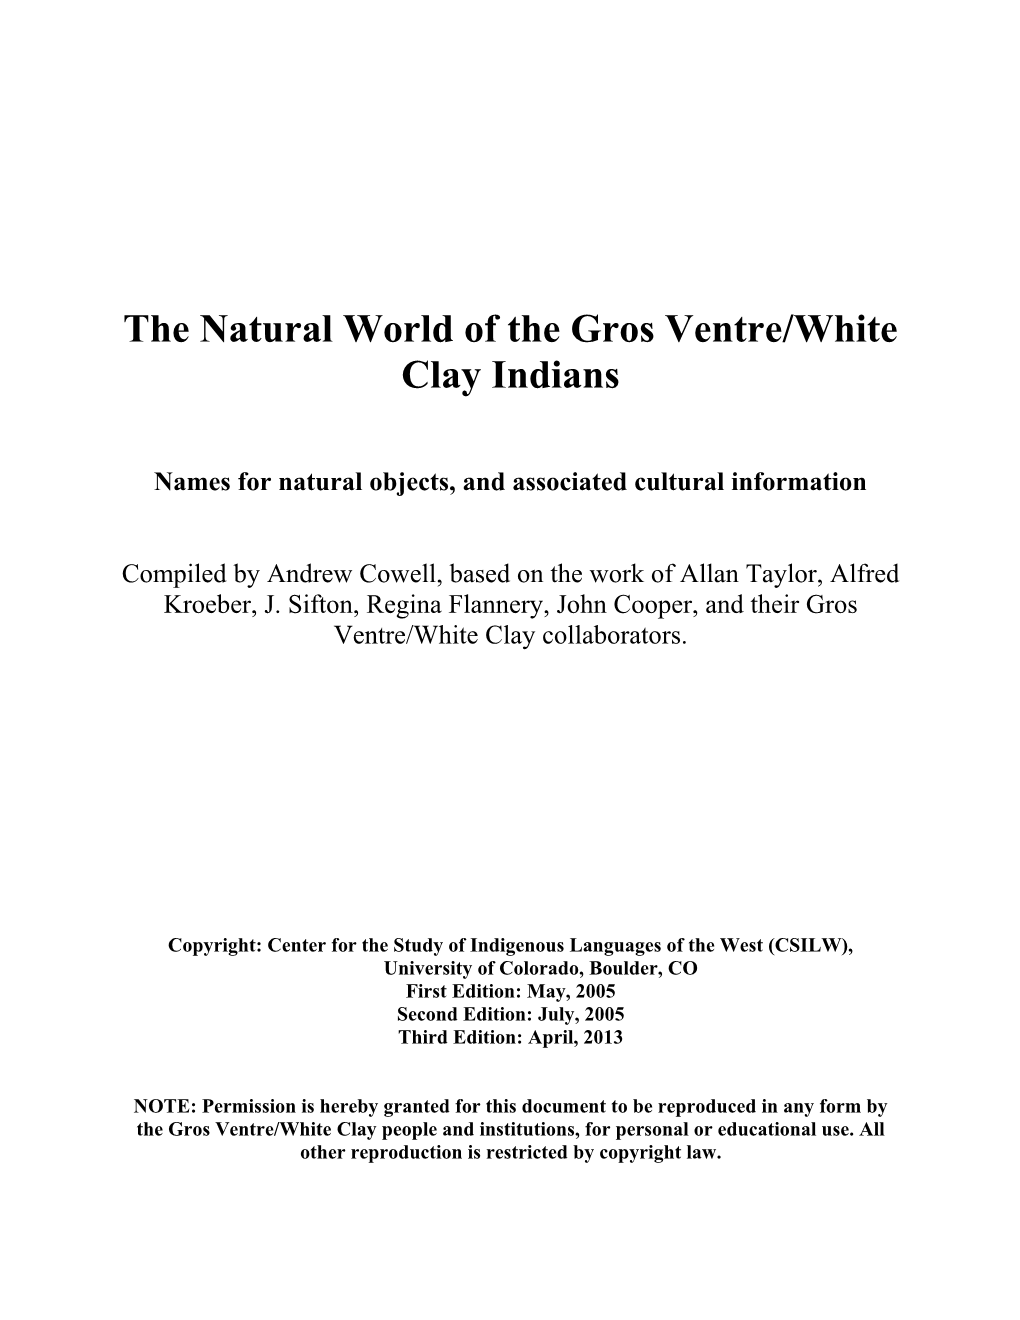 The Natural World of the Gros Ventre/White Clay Indians